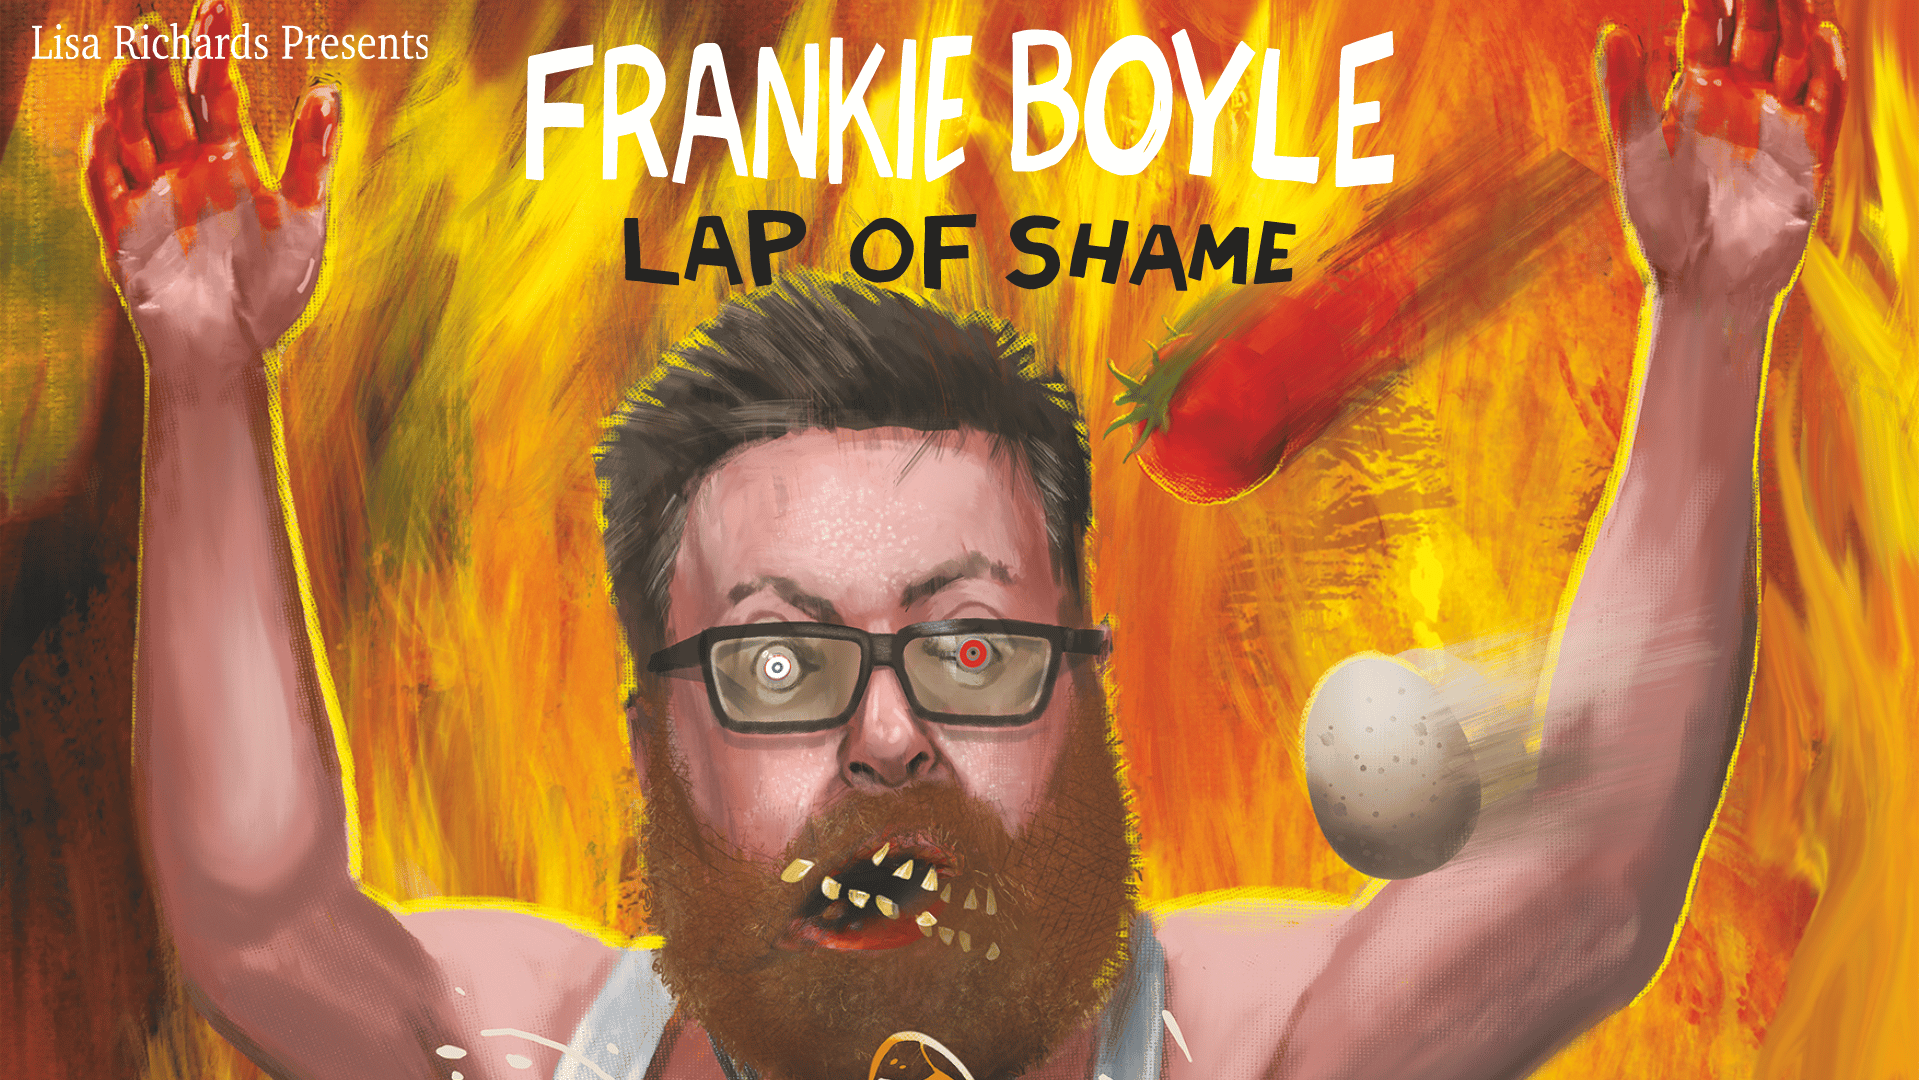 Frankie Boyle: Lap of Shame artwork - An illustration of Frankie Boyle with his arms in the air, wearing a running vest and a gold medal with the word 'loser' on it. He is running in front of a background of flames and he is being pelted with tomatoes and eggs. His teeth are flying out of his mouth and behind his glasses, one eye is white and the other is red. Text reads: Frankie Boyle: Lap of Shame